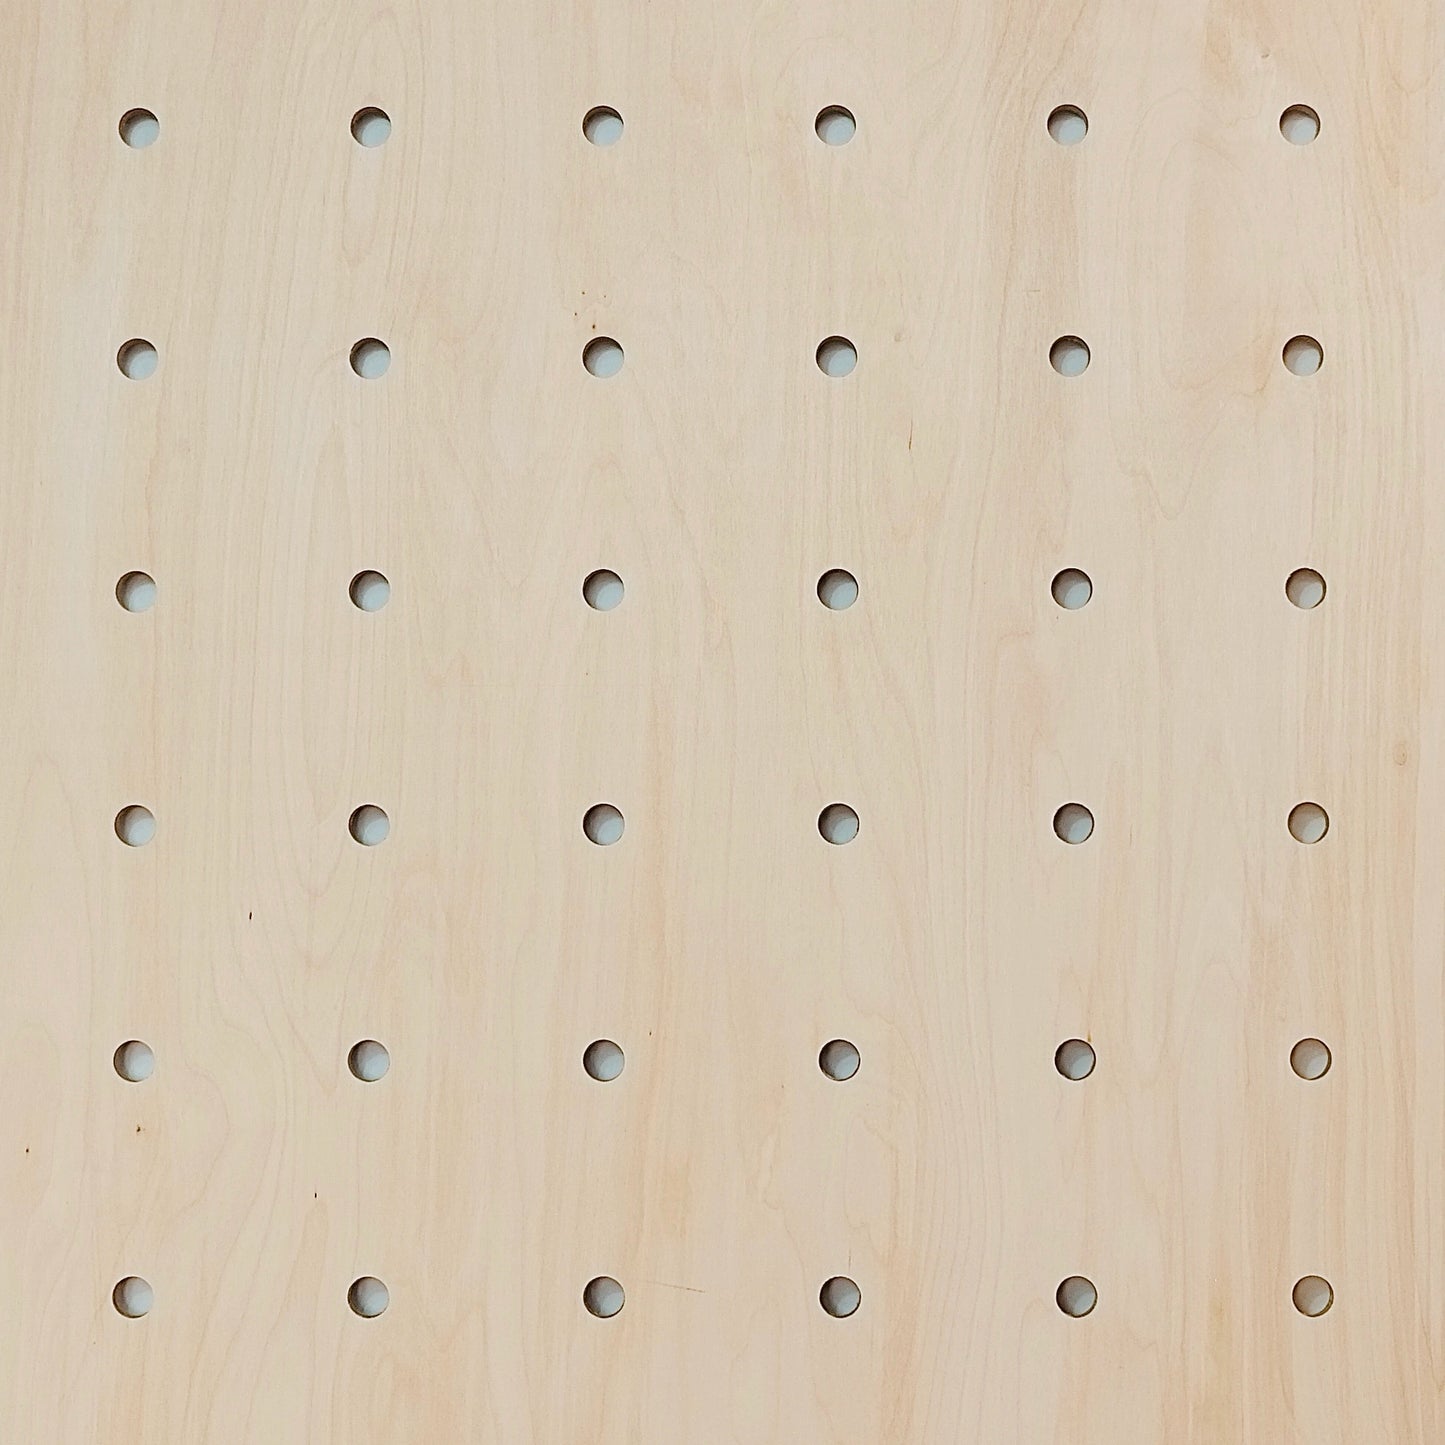 A close up of a pale wooden pegboard showing the round peg holes and the wood grain.